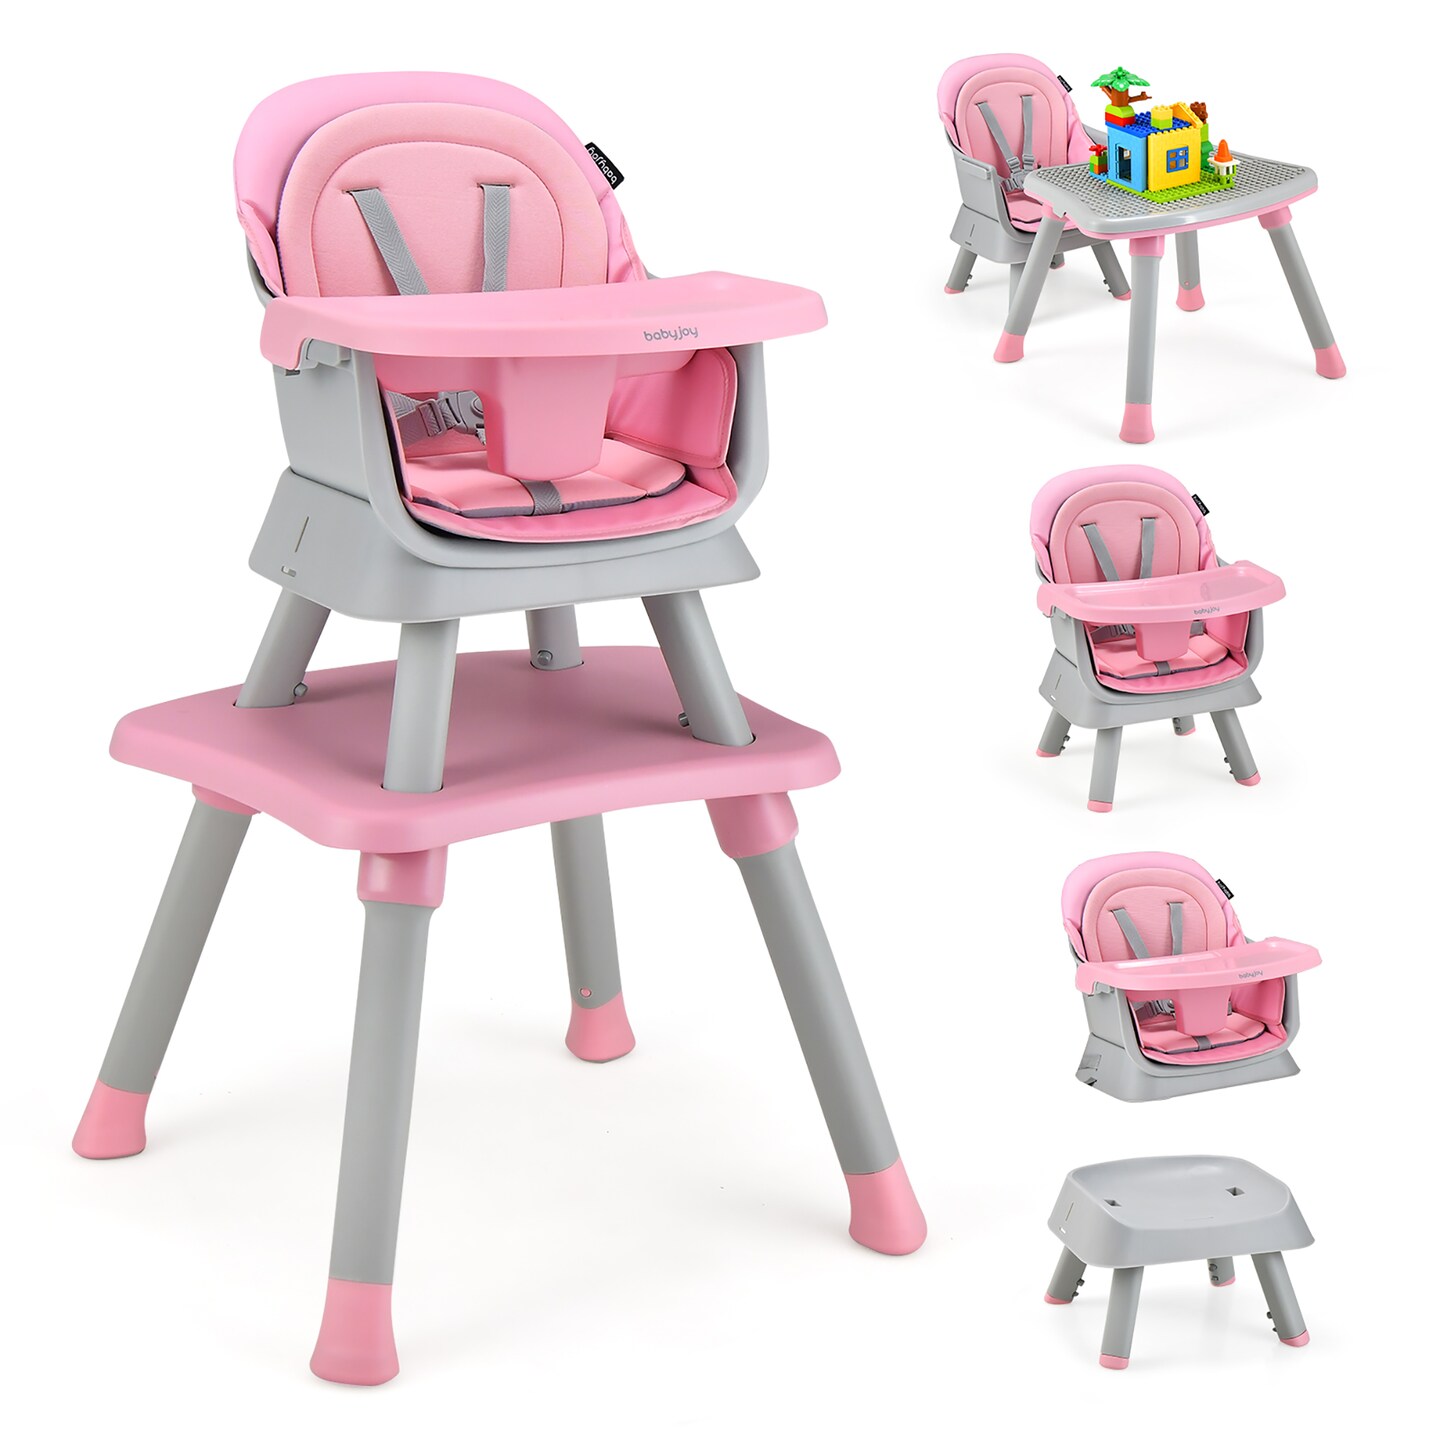 Babyjoy 8-in-1 Baby High Chair Convertible Dining Booster Seat with  Removable Tray Grey/Pink/Yellowith Strip/Black